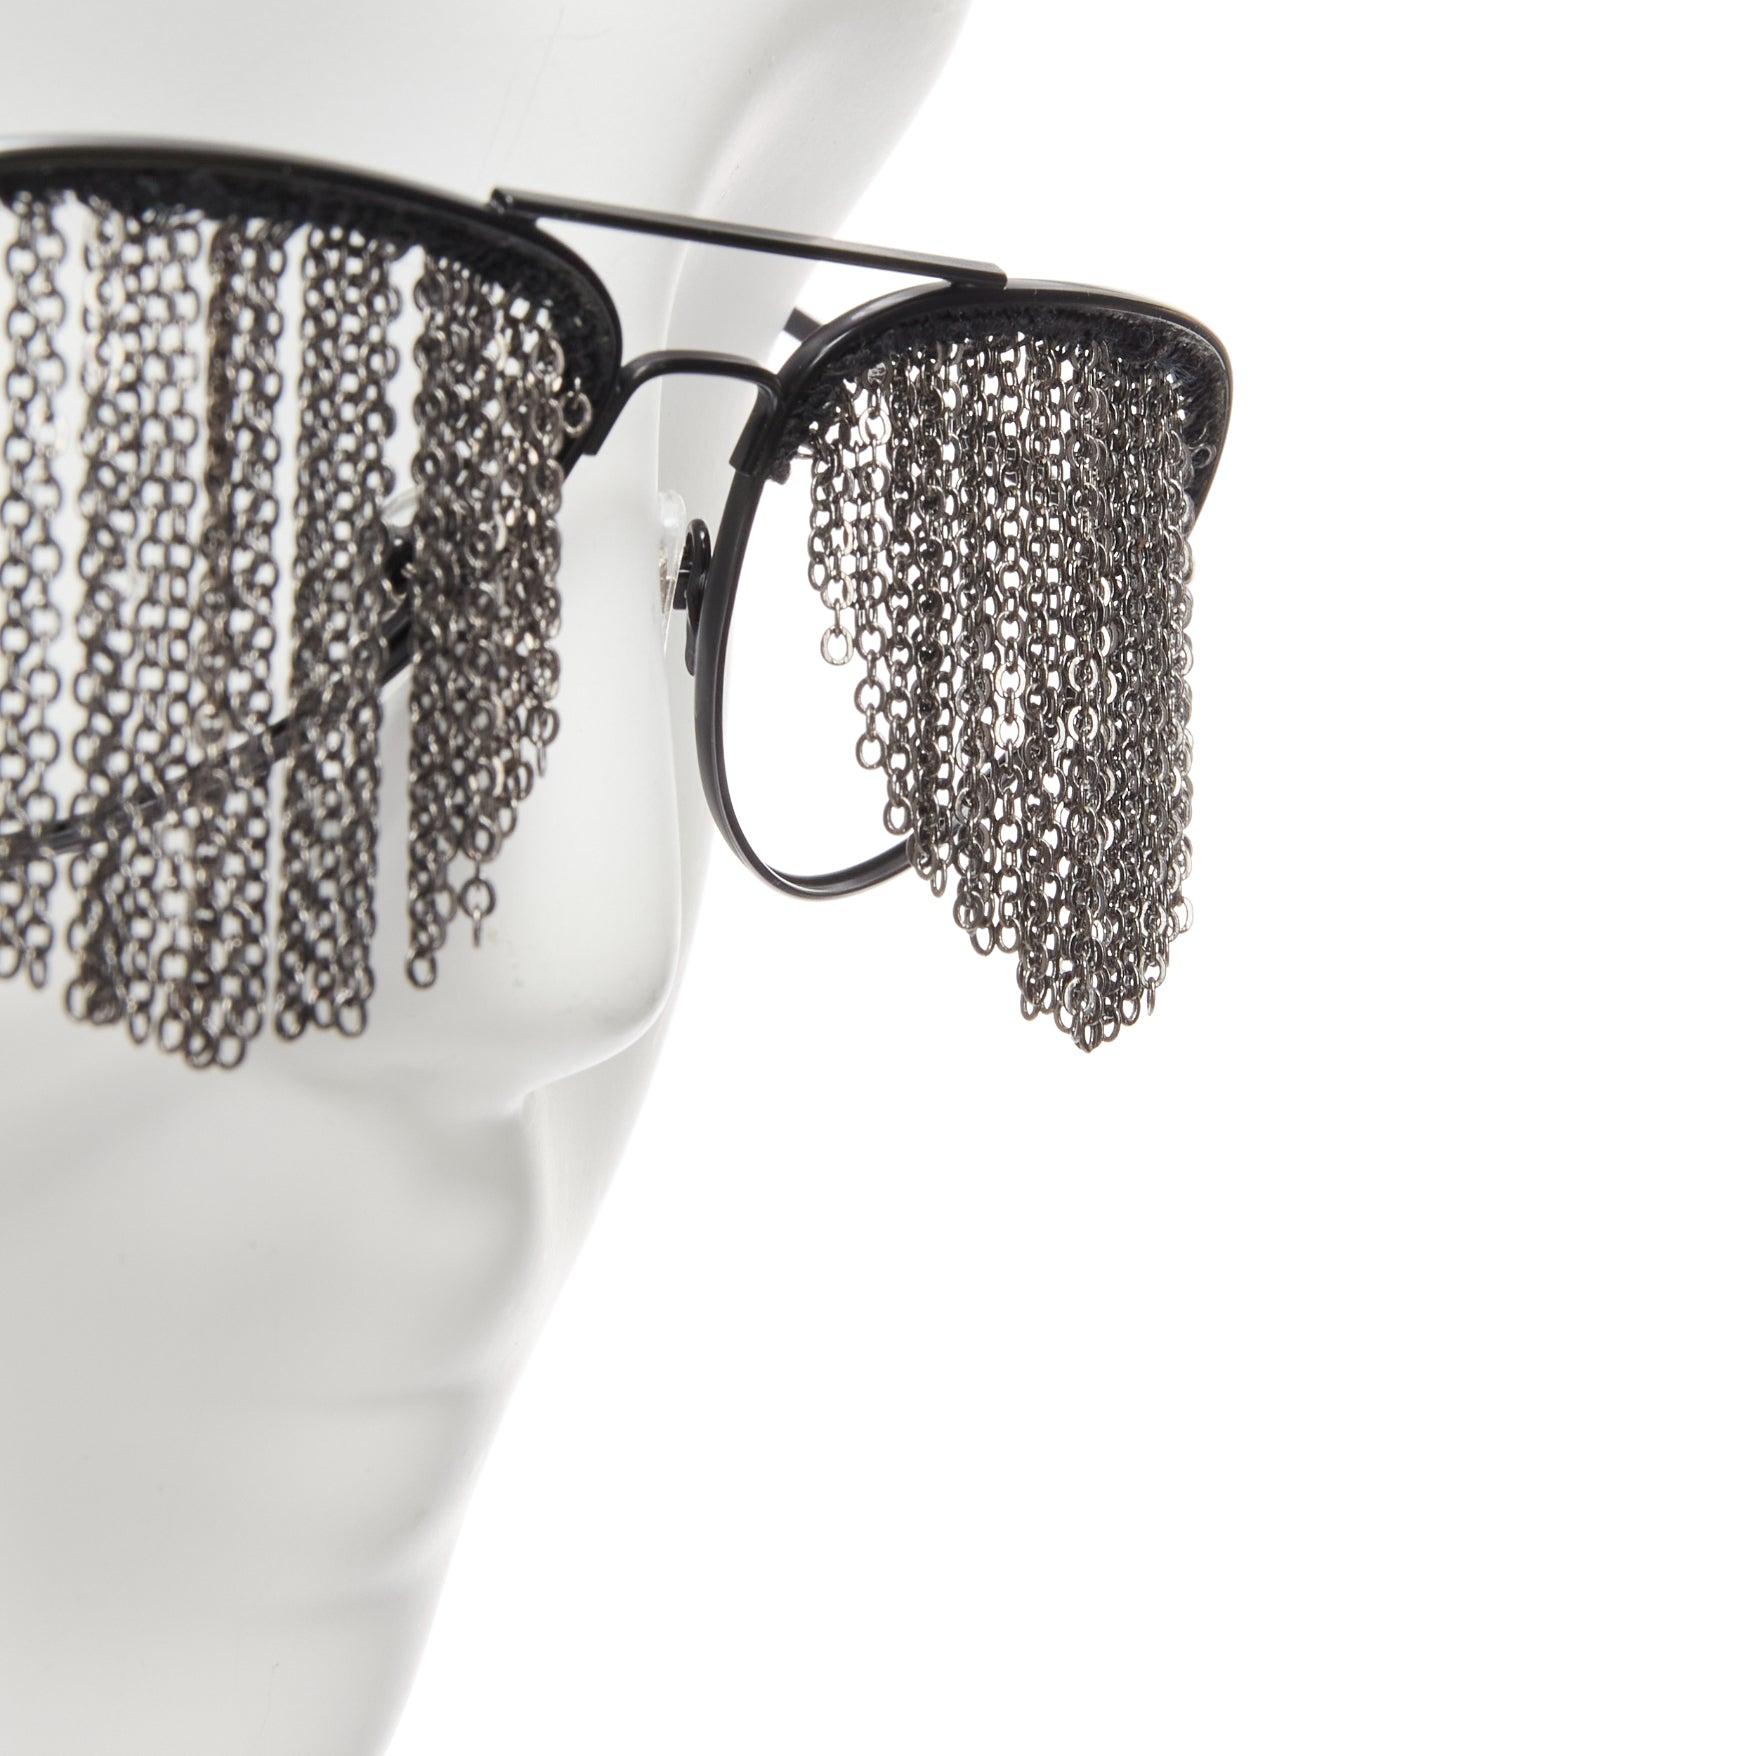 rare BLESS Duo Fringe black chain no lens aviator sunglasses
Reference: TGAS/D00713
Brand: Bless
Model: Duo Fringe
Material: Metal
Color: Black
Pattern: Solid
Closure: Pull On
Lining: Black Metal

CONDITION:
Condition: New with defects. One chain at